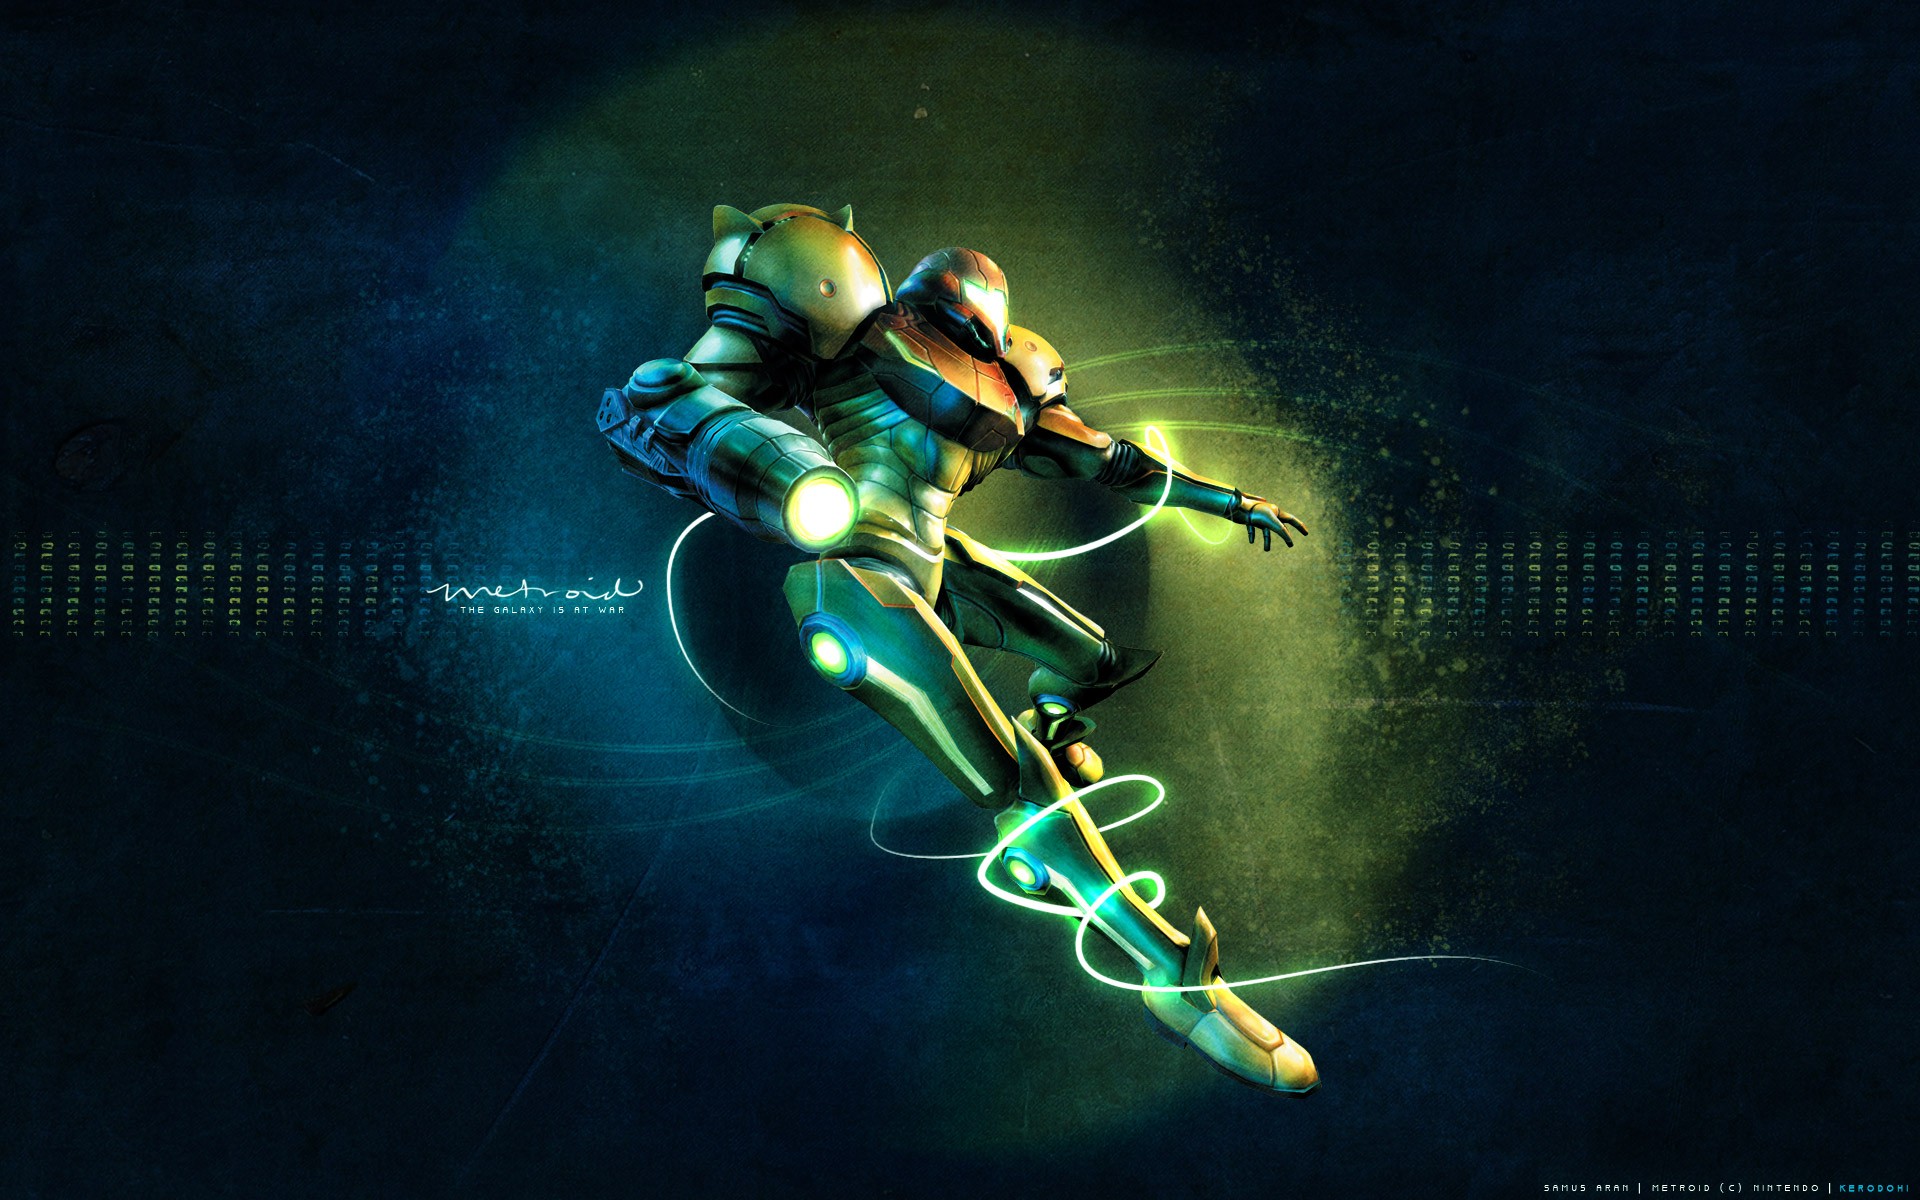 metroid prime remastered images